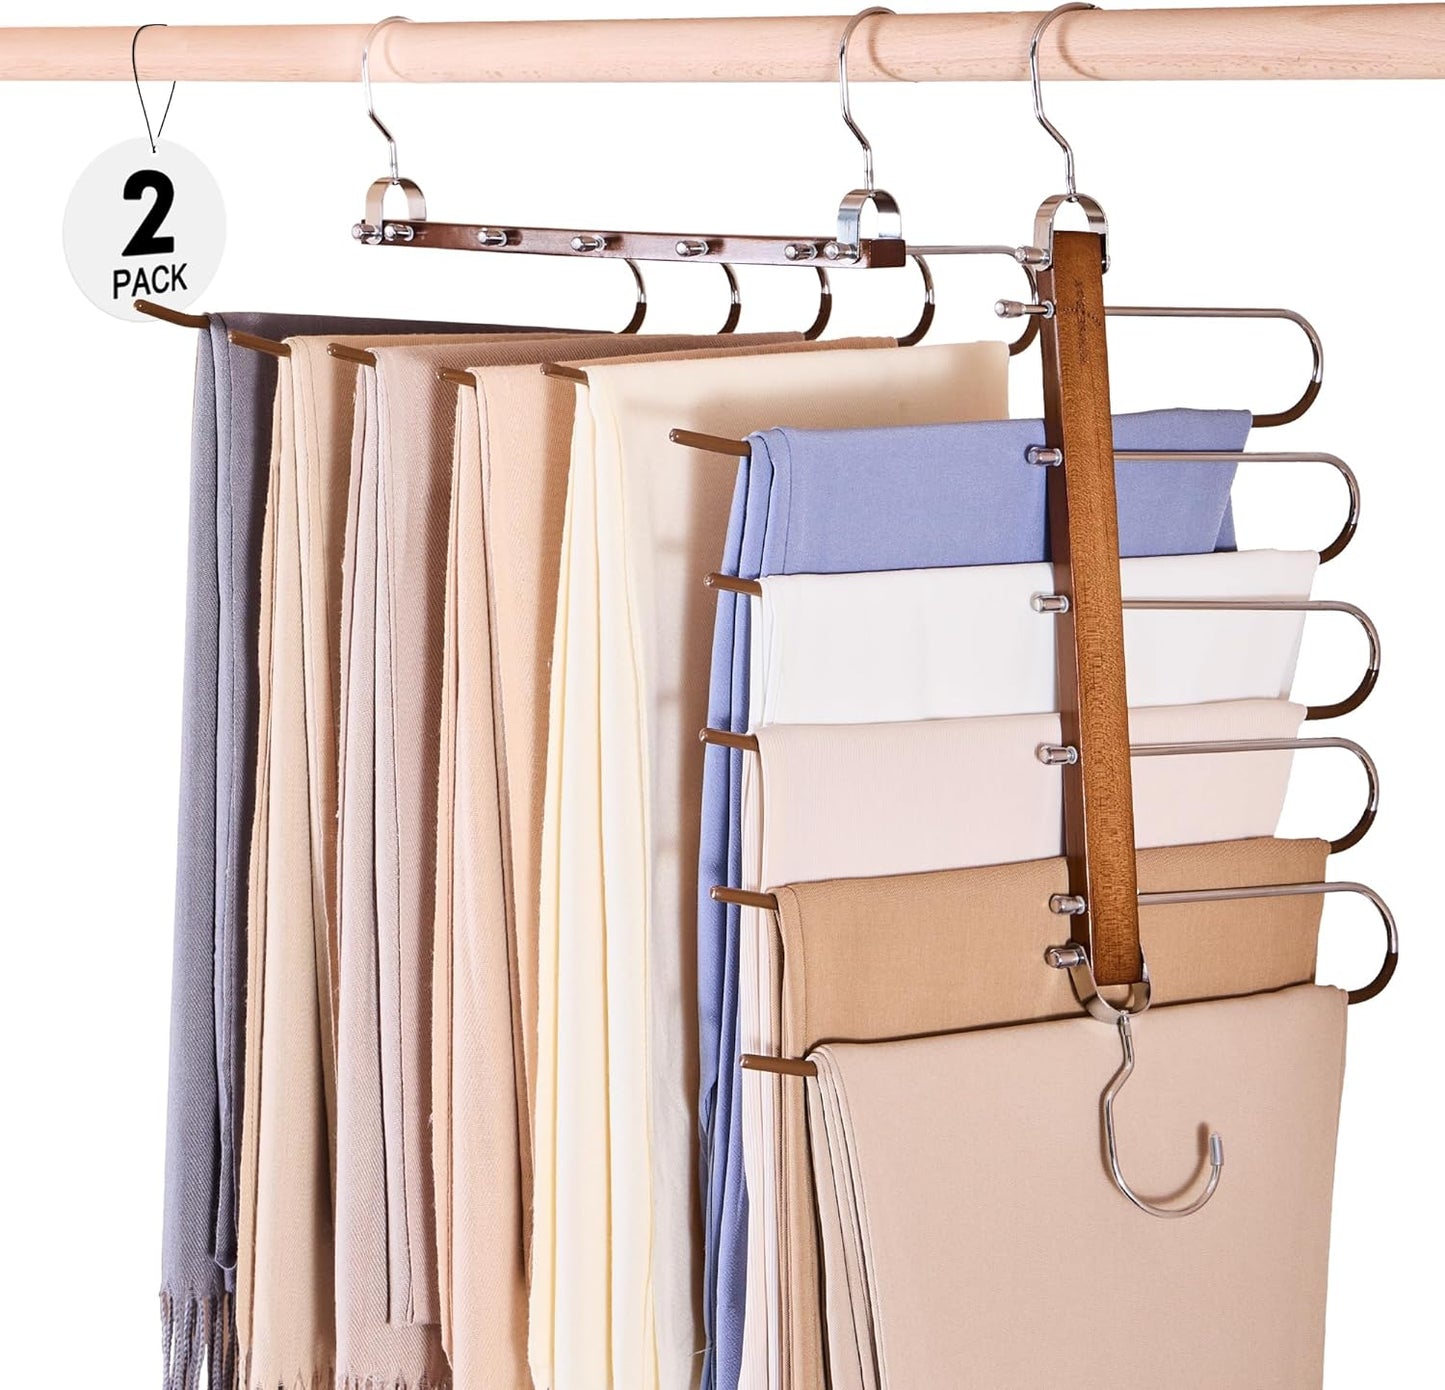 HOUSE DAY Pants Hangers Space Saving, Wood Jean Hangers for Closet 2 pack